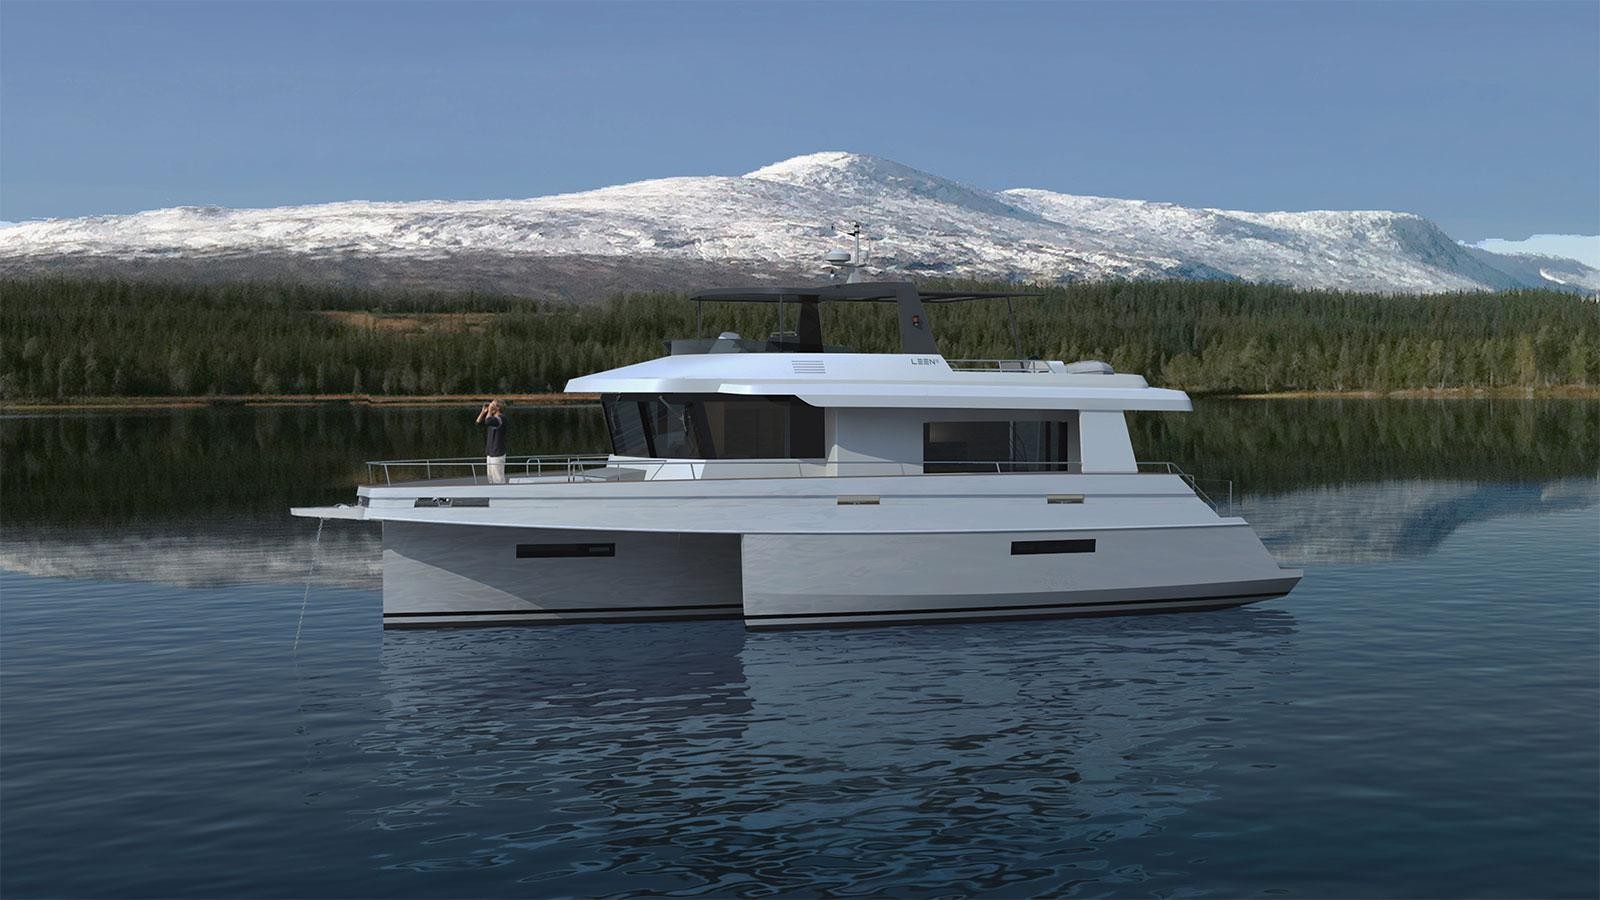 The Leen 56 combines all the advantages of the travel yacht